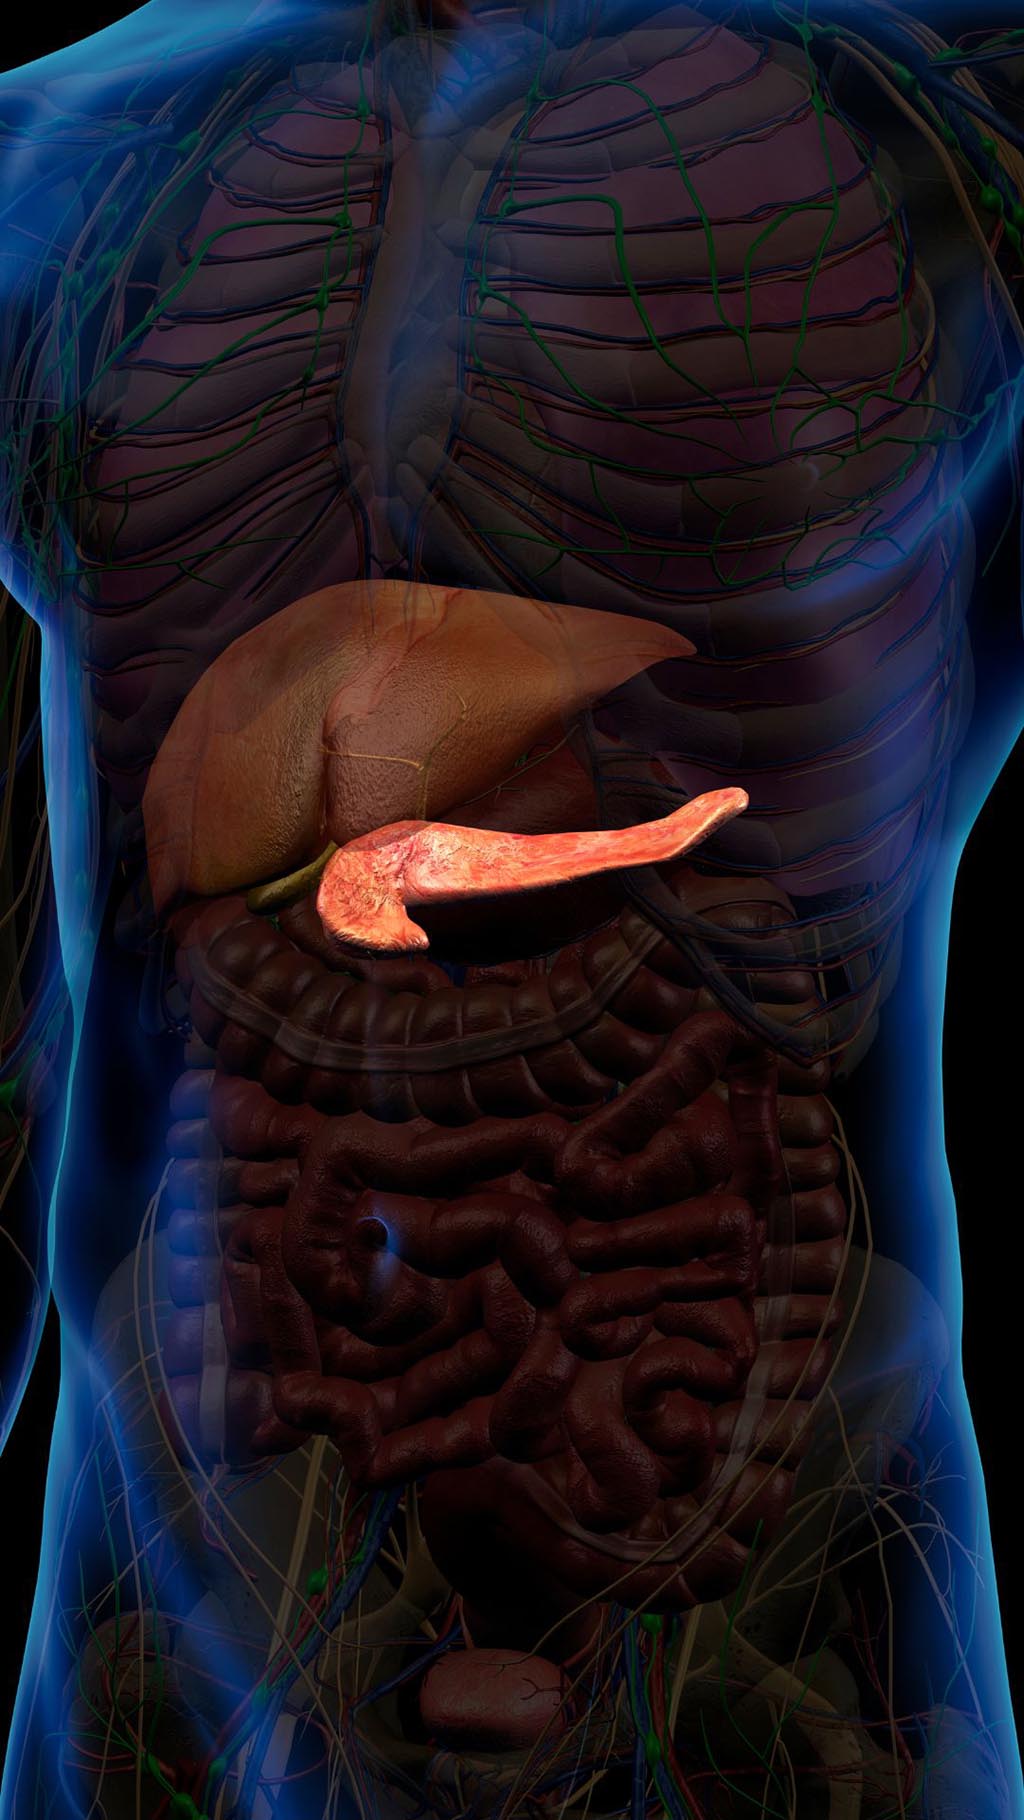 Early detection is of critical importance for pancreas cancers